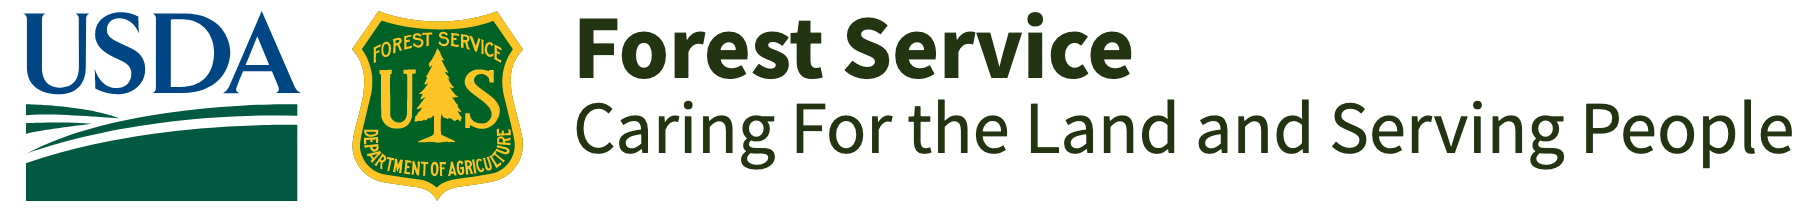 USDA-US Forest Service Joint Logos with Slogan